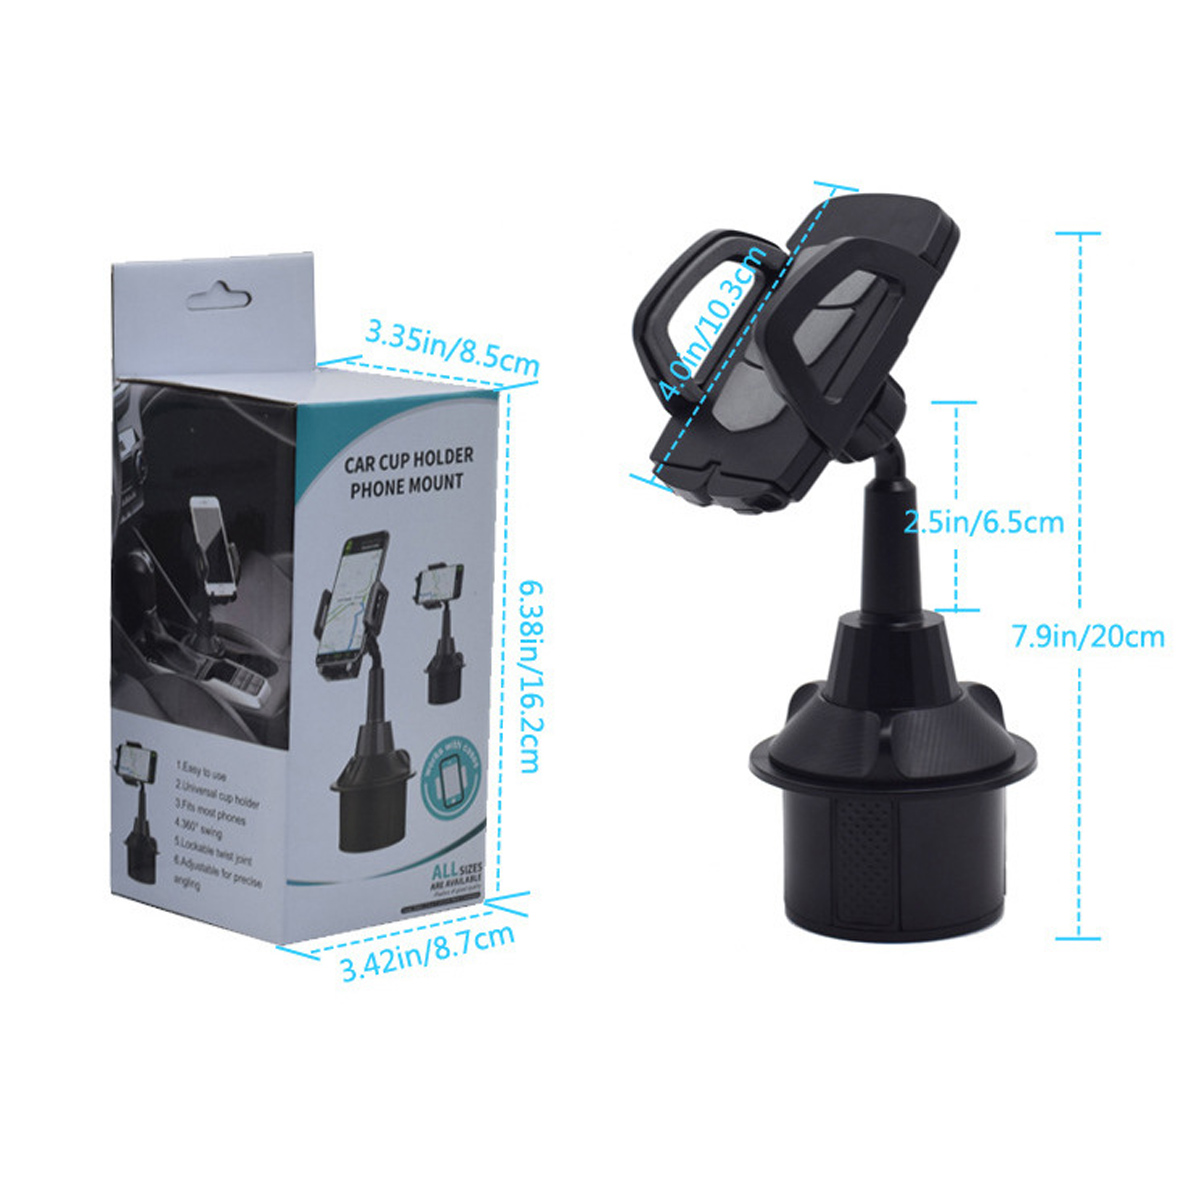 Universal-360-Rotation-Car-Phone-Mount-Gooseneck-Cup-Holder-for-5-95cm-Width-Cell-Phone-for-iPhone-1-1720314-10